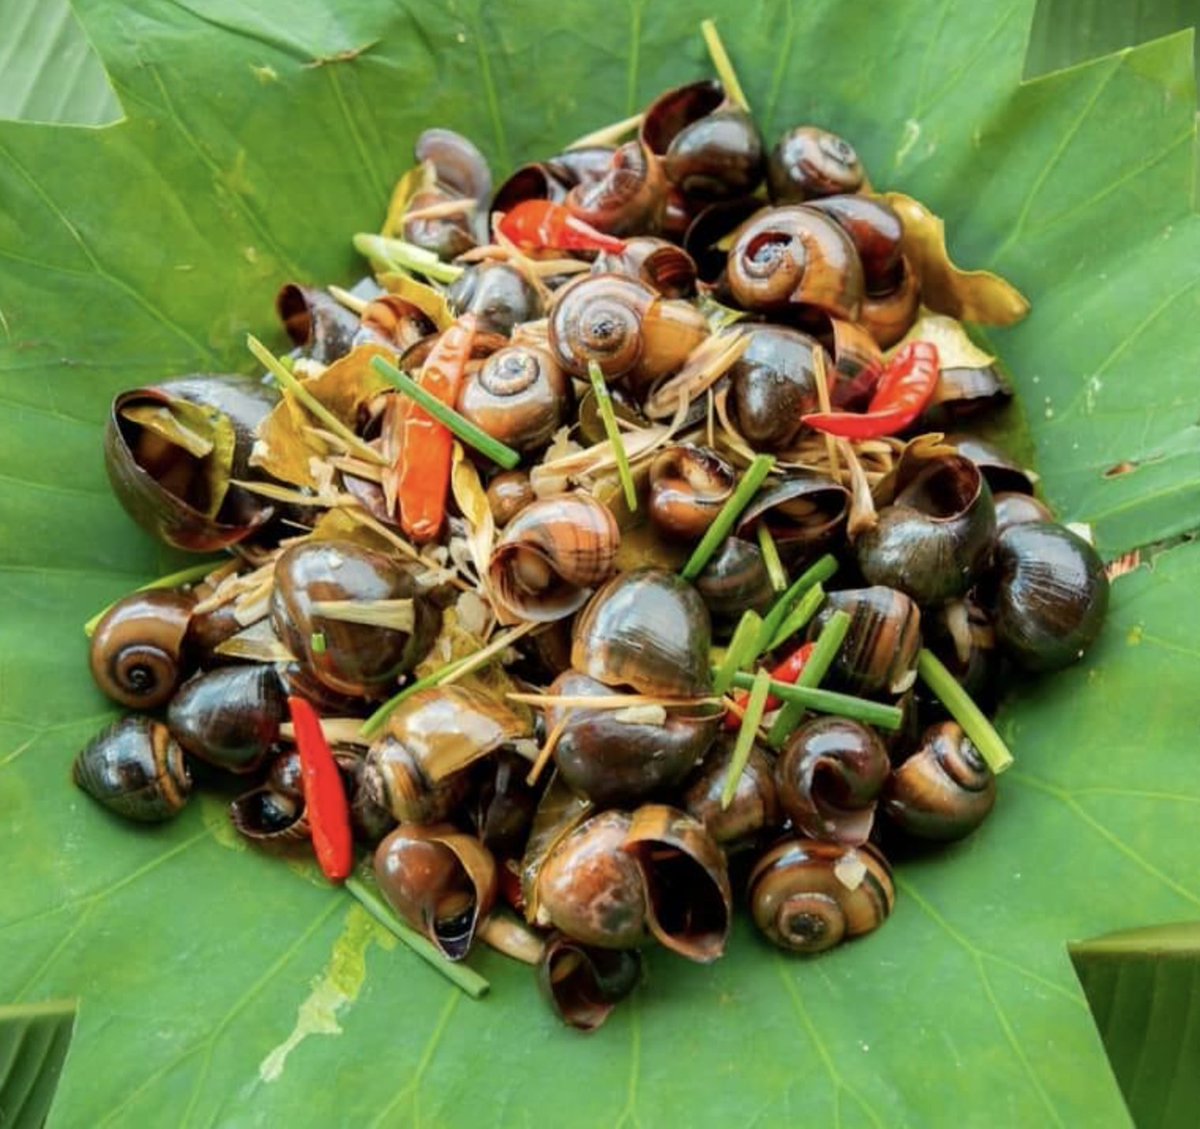 Do you like snails? Its steamed snails with lemongrass ingredients!